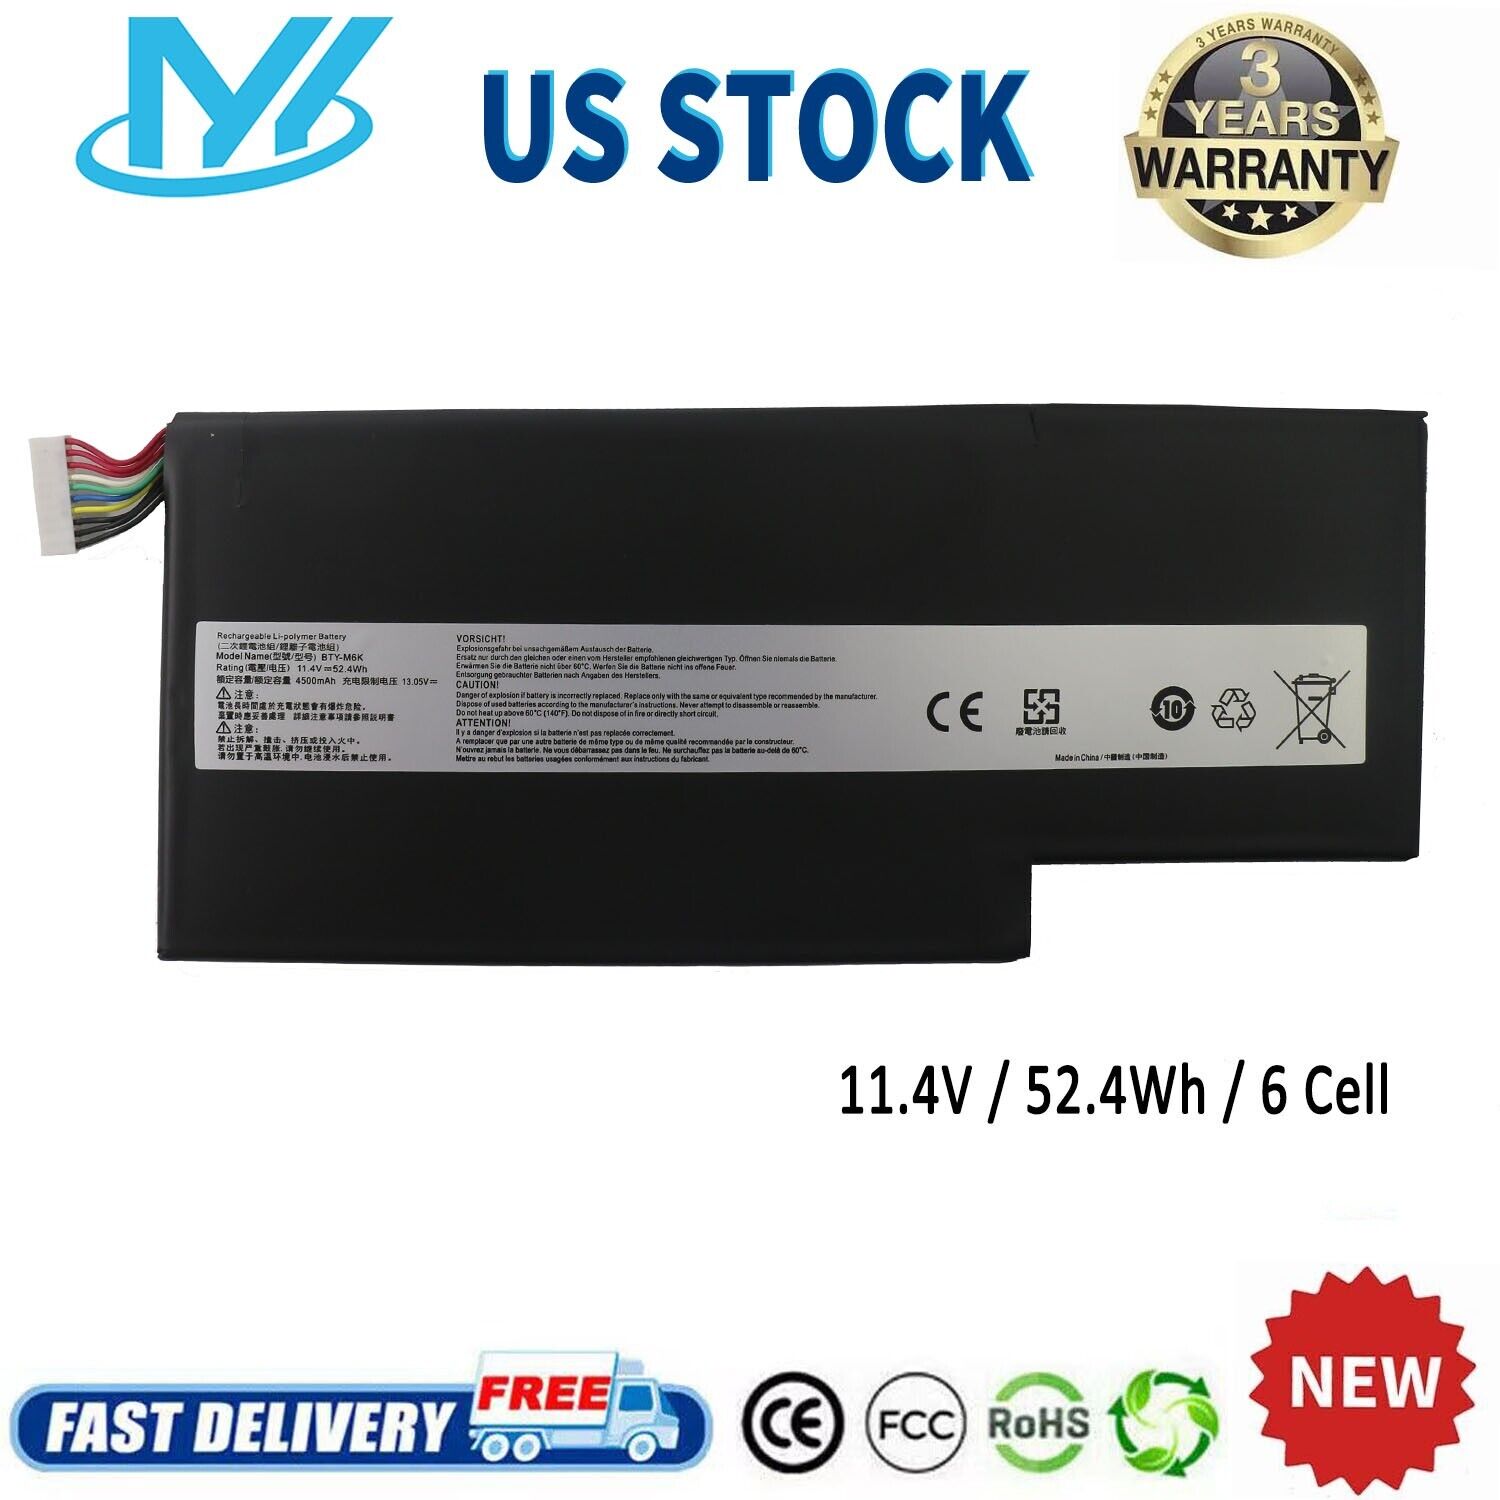 ✅BTY-M6K Battery For MSI GF63 Thin 8RD 8RC 9SC GF75 Thin 3RD 8RC 8RD 9SC 52.4Wh